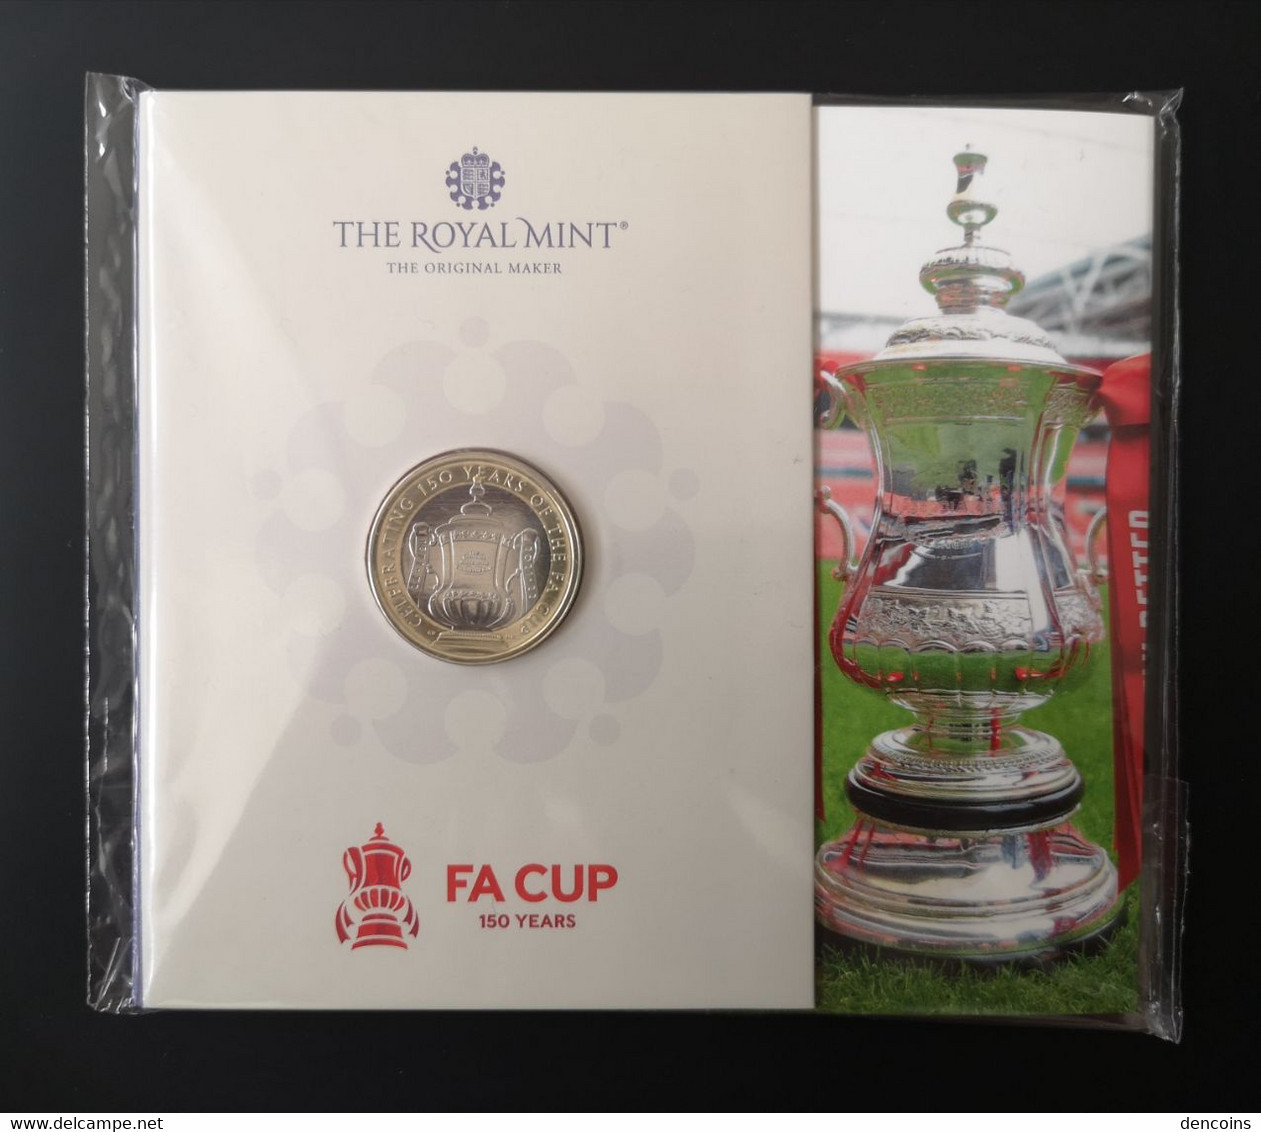 2 POUNDS GREAT BRITAIN 2022 THE 150TH ANNIVERSARY OF THE FA CUP - £2 - 2 LIBRAS GRAN BRETAÑA GB - NEUF - NEW - 2 Pond